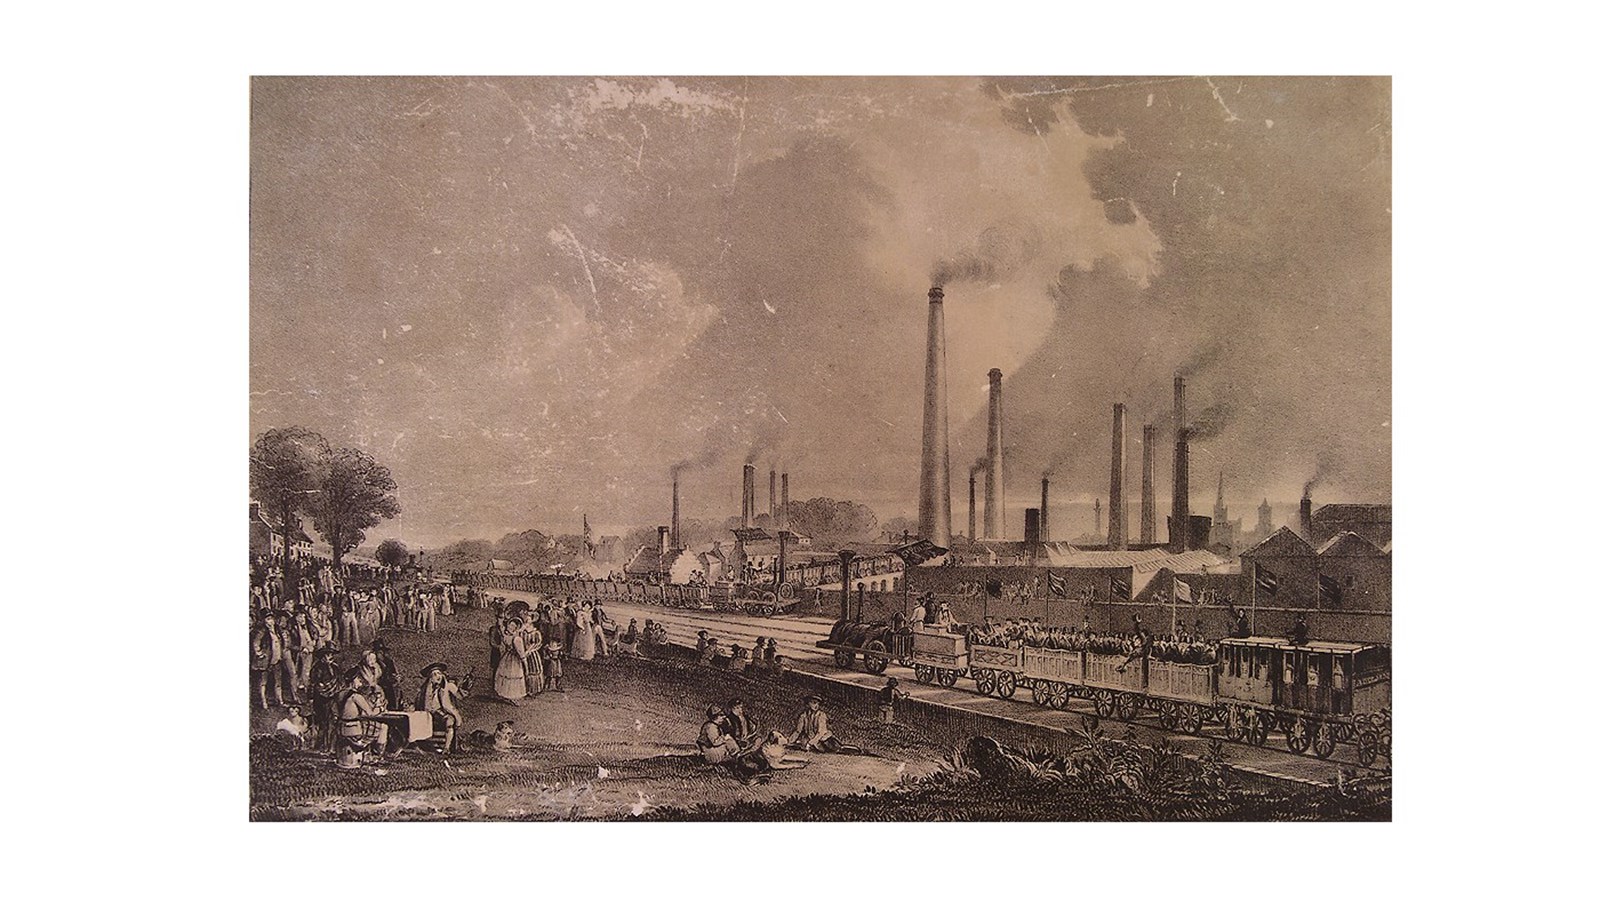 a monochrome drawing of an industrial scene with tall, slender chimneys belching smoke into the sky.